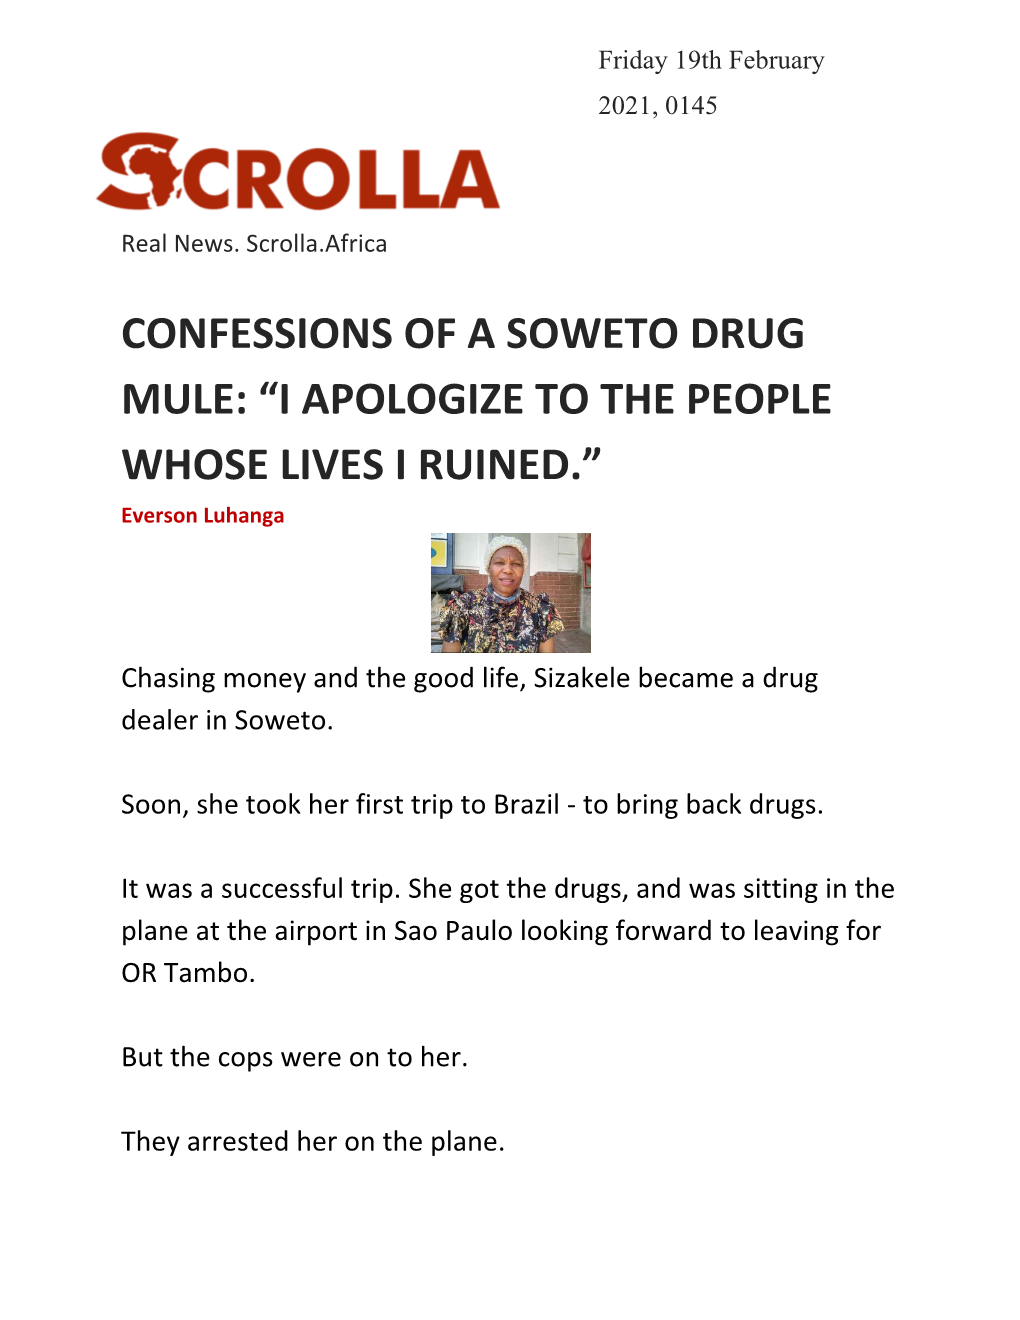 CONFESSIONS of a SOWETO DRUG MULE: “I APOLOGIZE to the PEOPLE WHOSE LIVES I RUINED.” Everson Luhanga